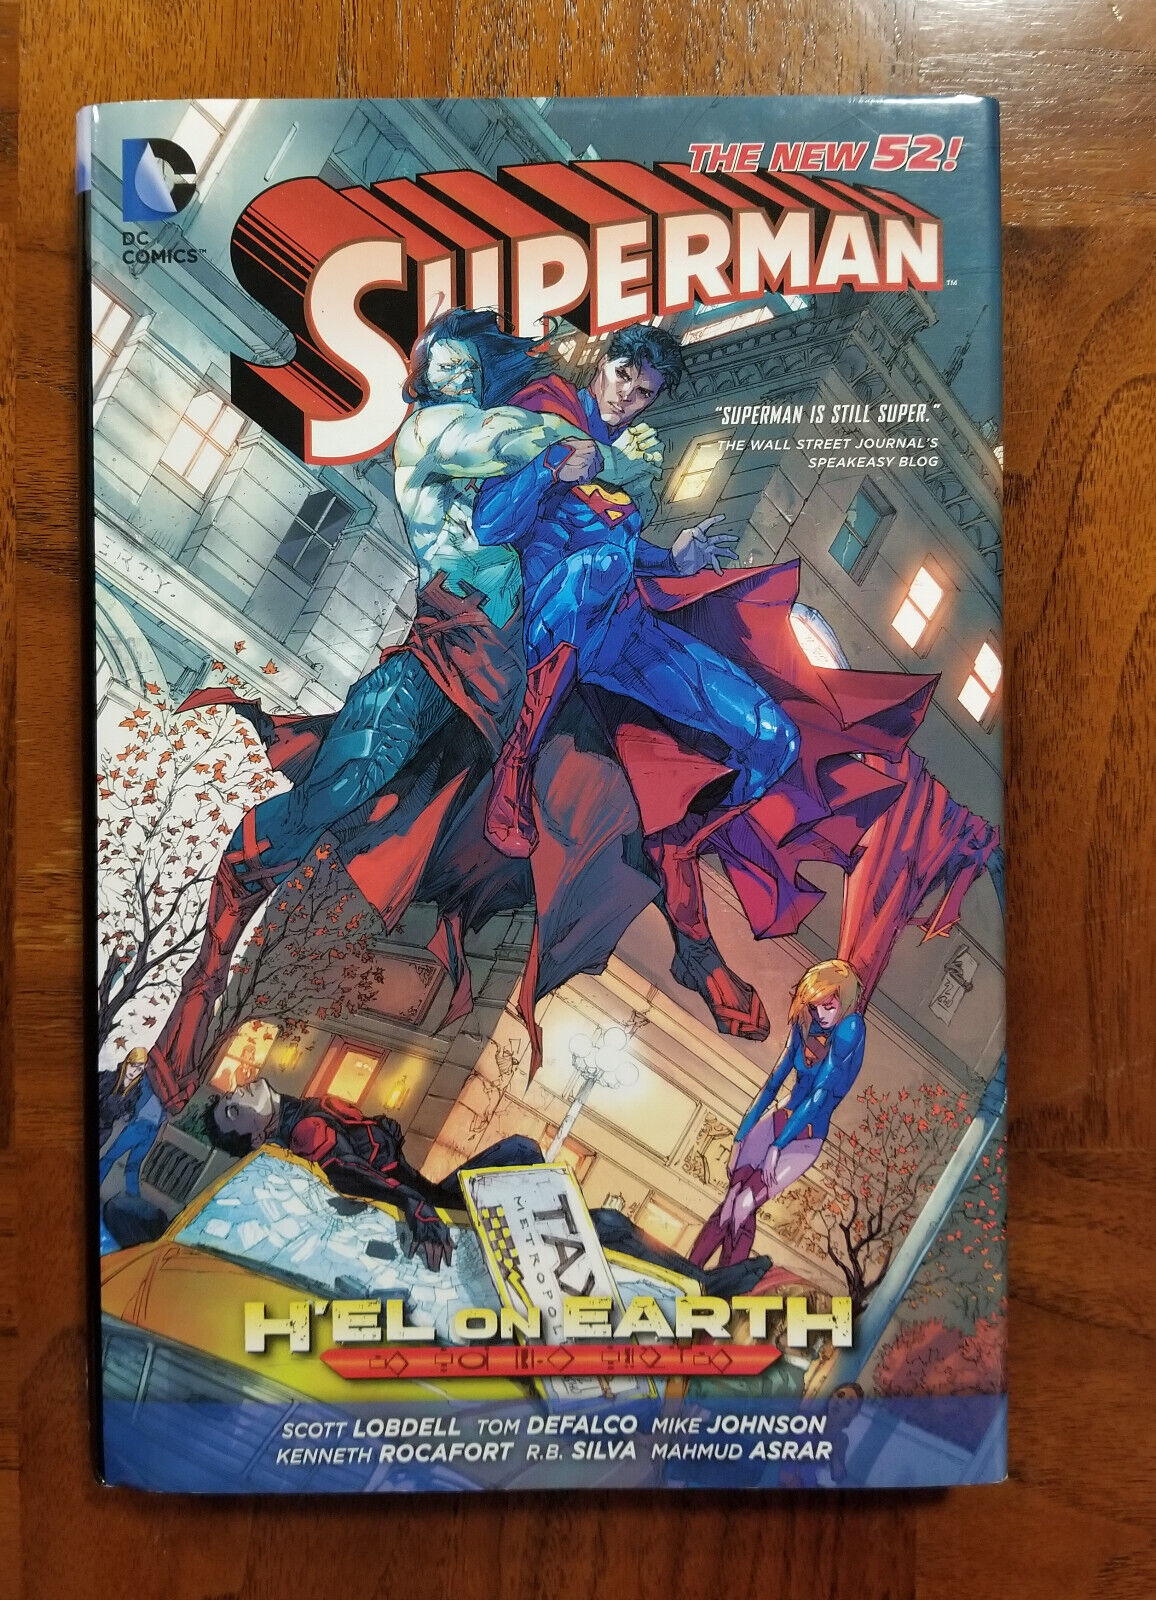 Superman: H'el on Earth The New 52 Hardcover w/ Original Dust Jacket 